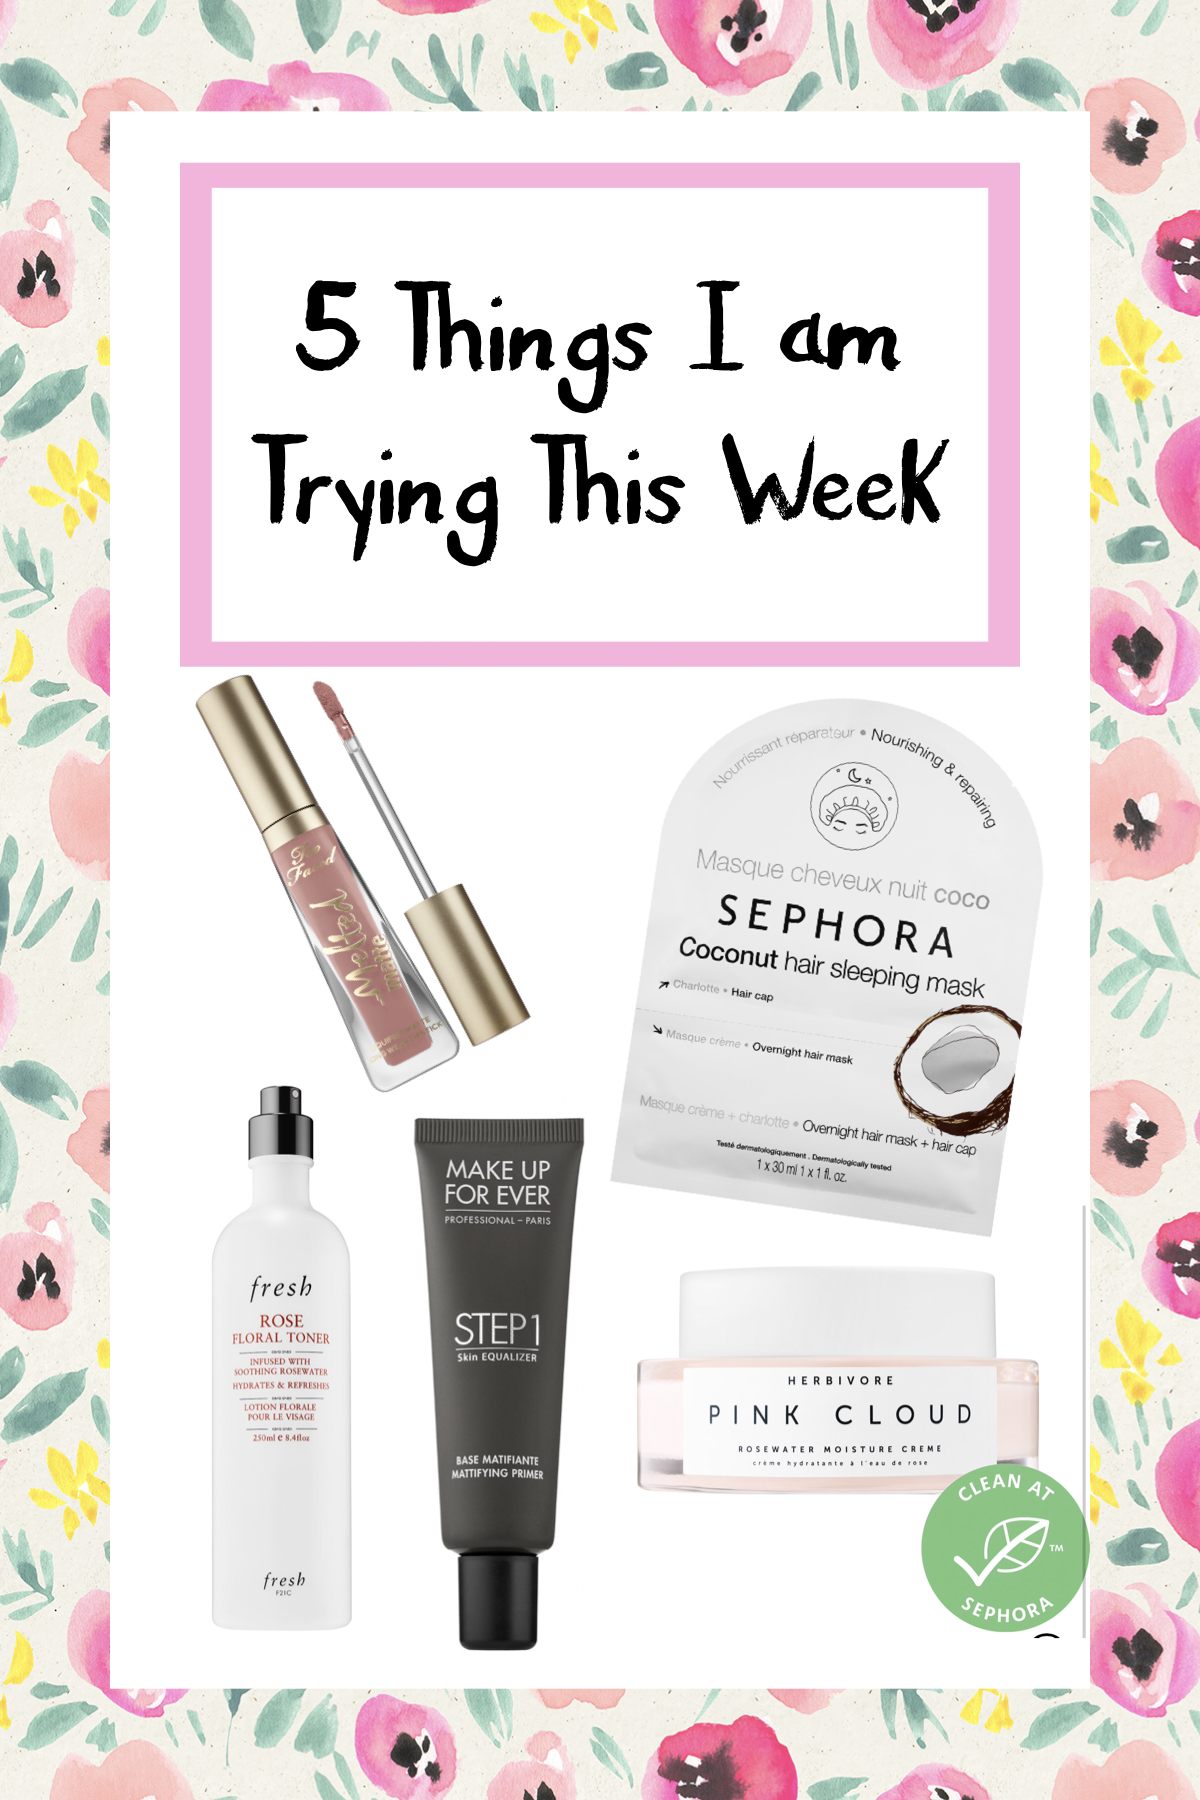 5 Things I am Trying This Week